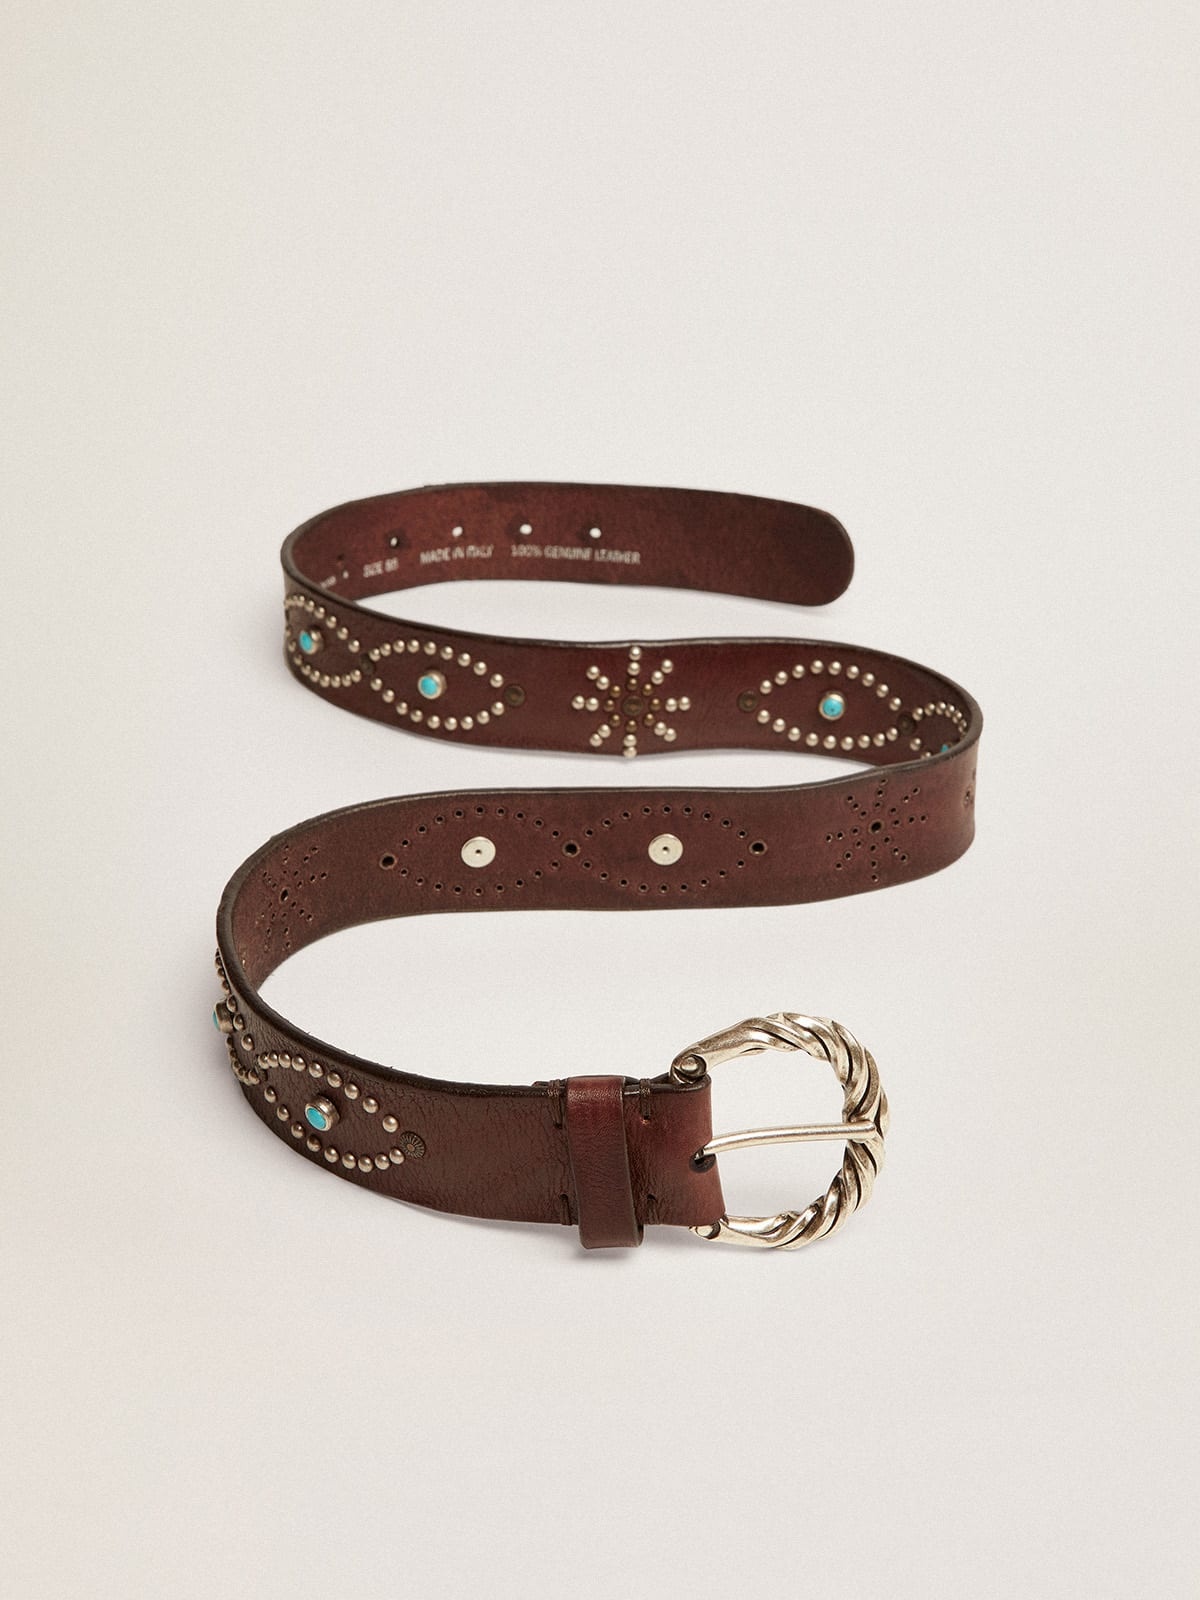 Women's belt in dark brown leather with colored studs - 4